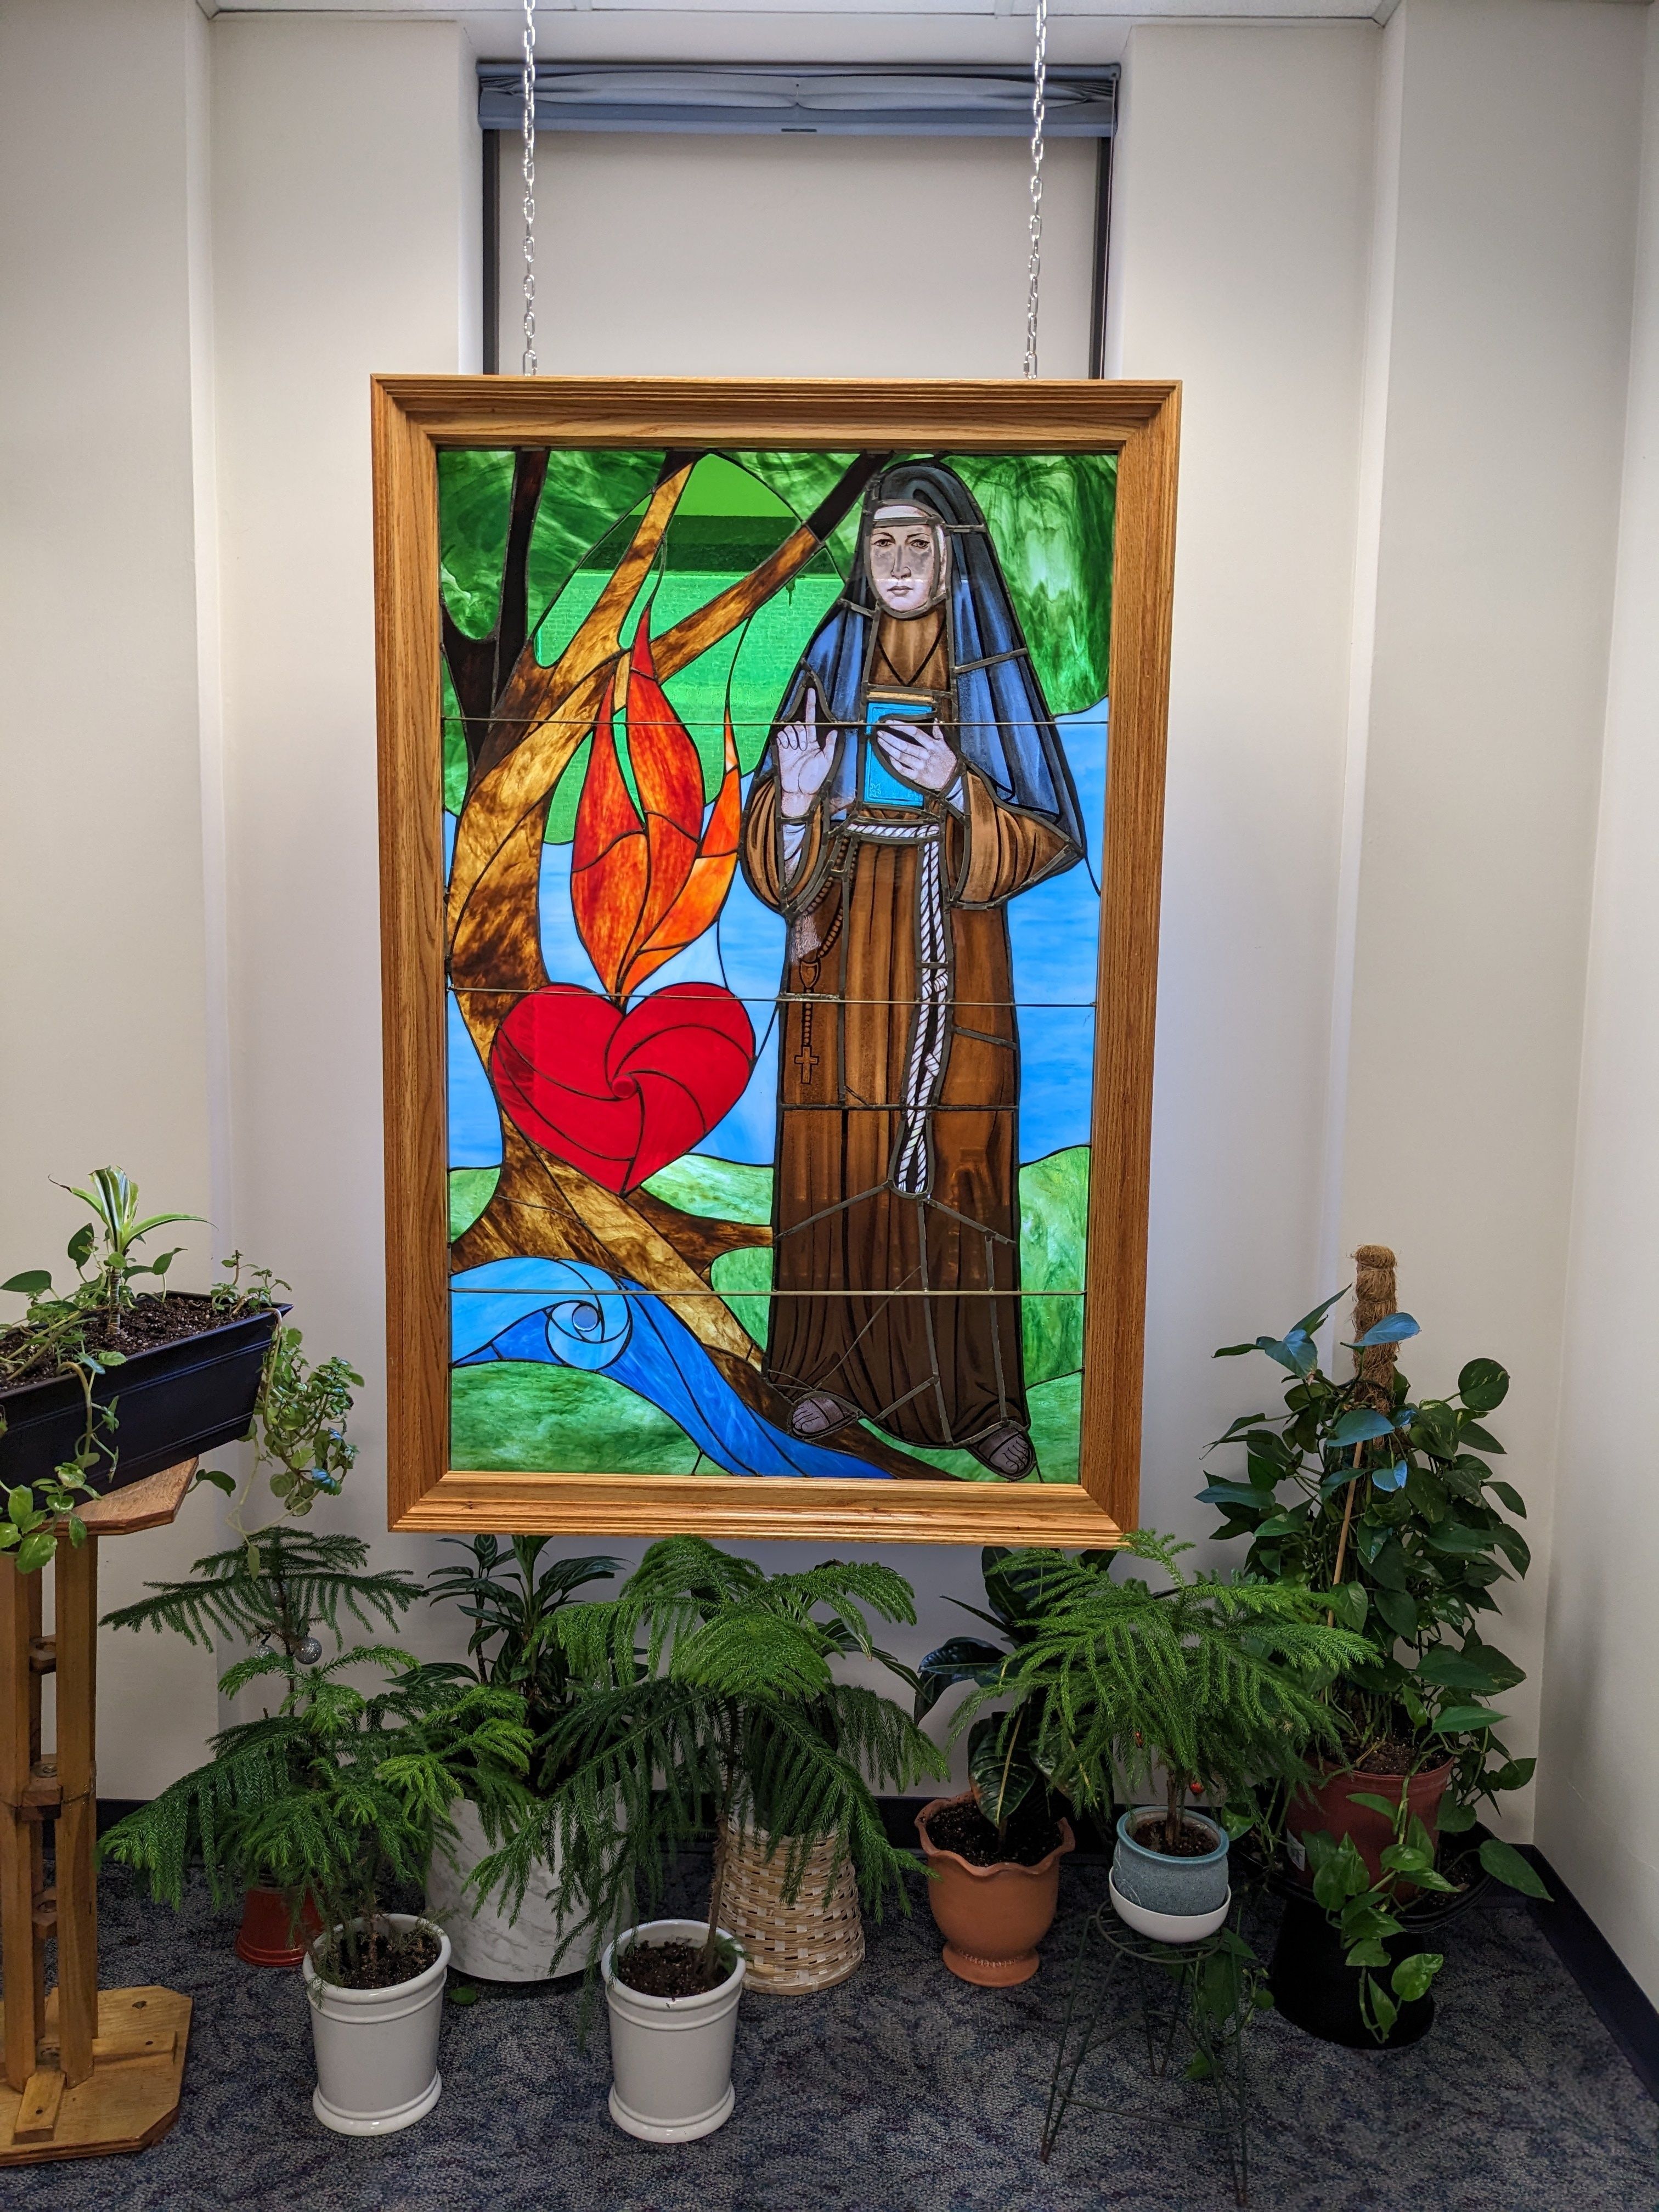 A framed stain glass window of Blessed Mary Angela, founder of the Felician Sisters, hangs on the wall above green potted plants. 